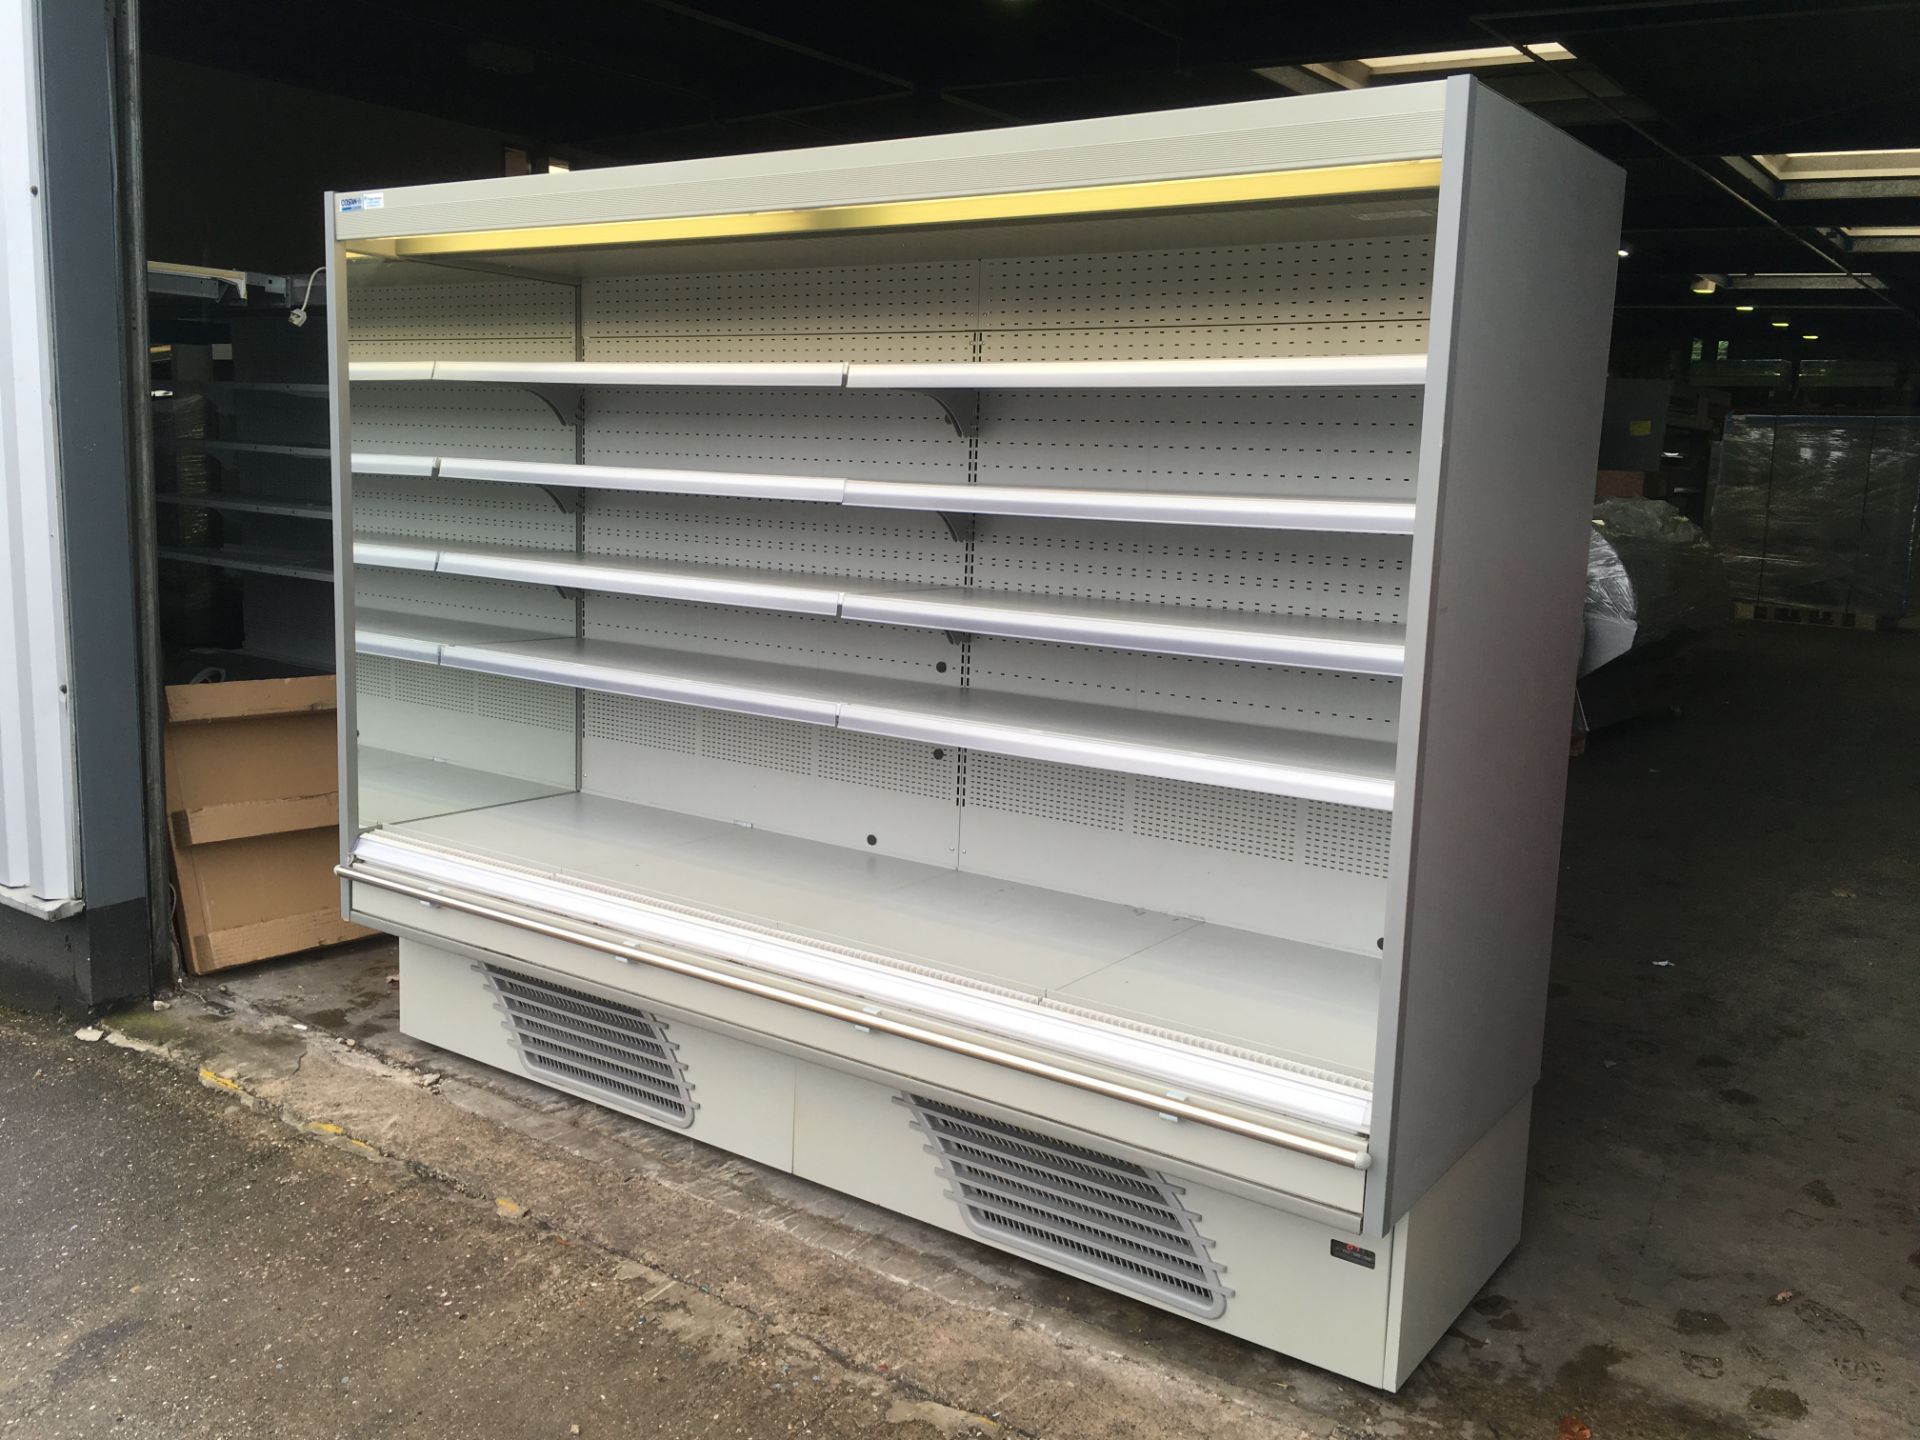 1 X Costan Ouverture integral Multi Deck Display Fridge - 2.5m wide - Image 3 of 4